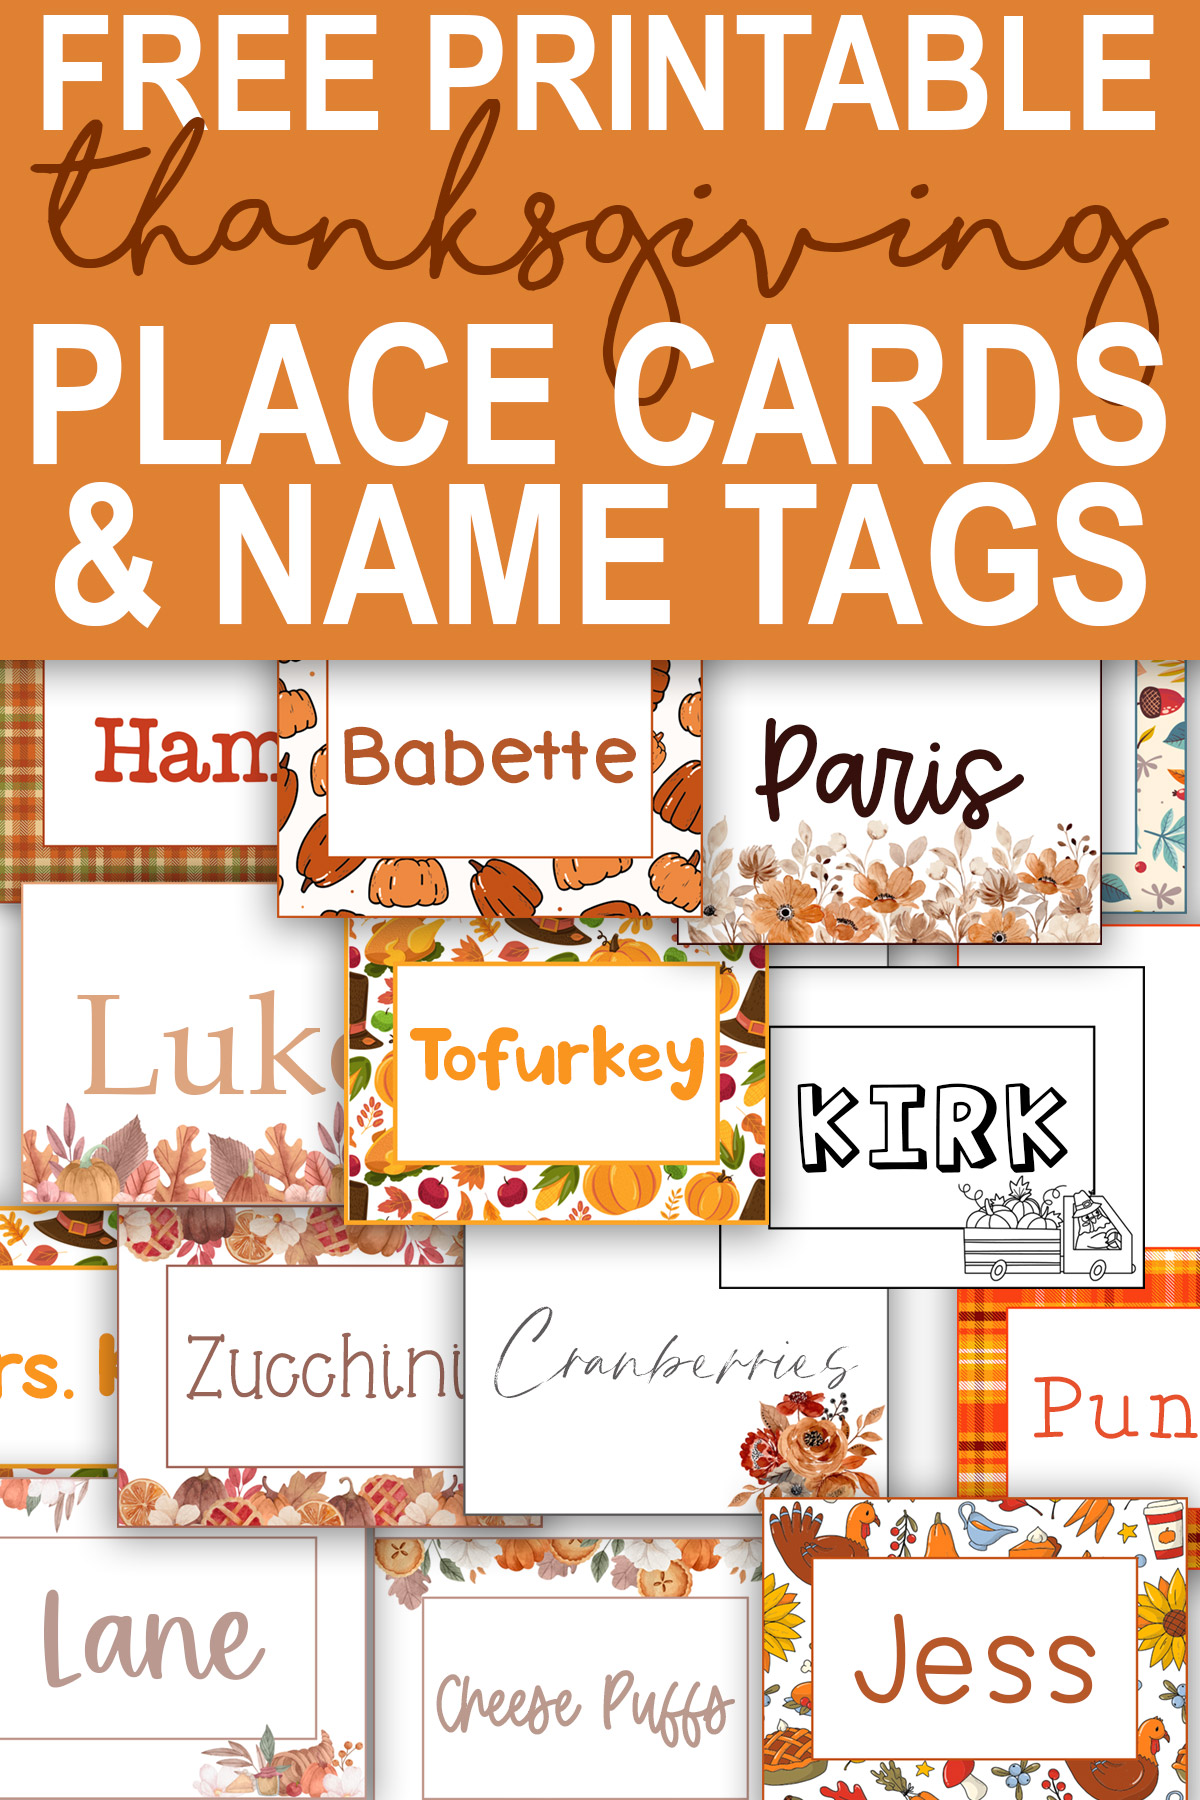 At the top it says free printable Thanksgiving place cards & name tags. Below that are some examples of the name tags and place cards you can get in this post.